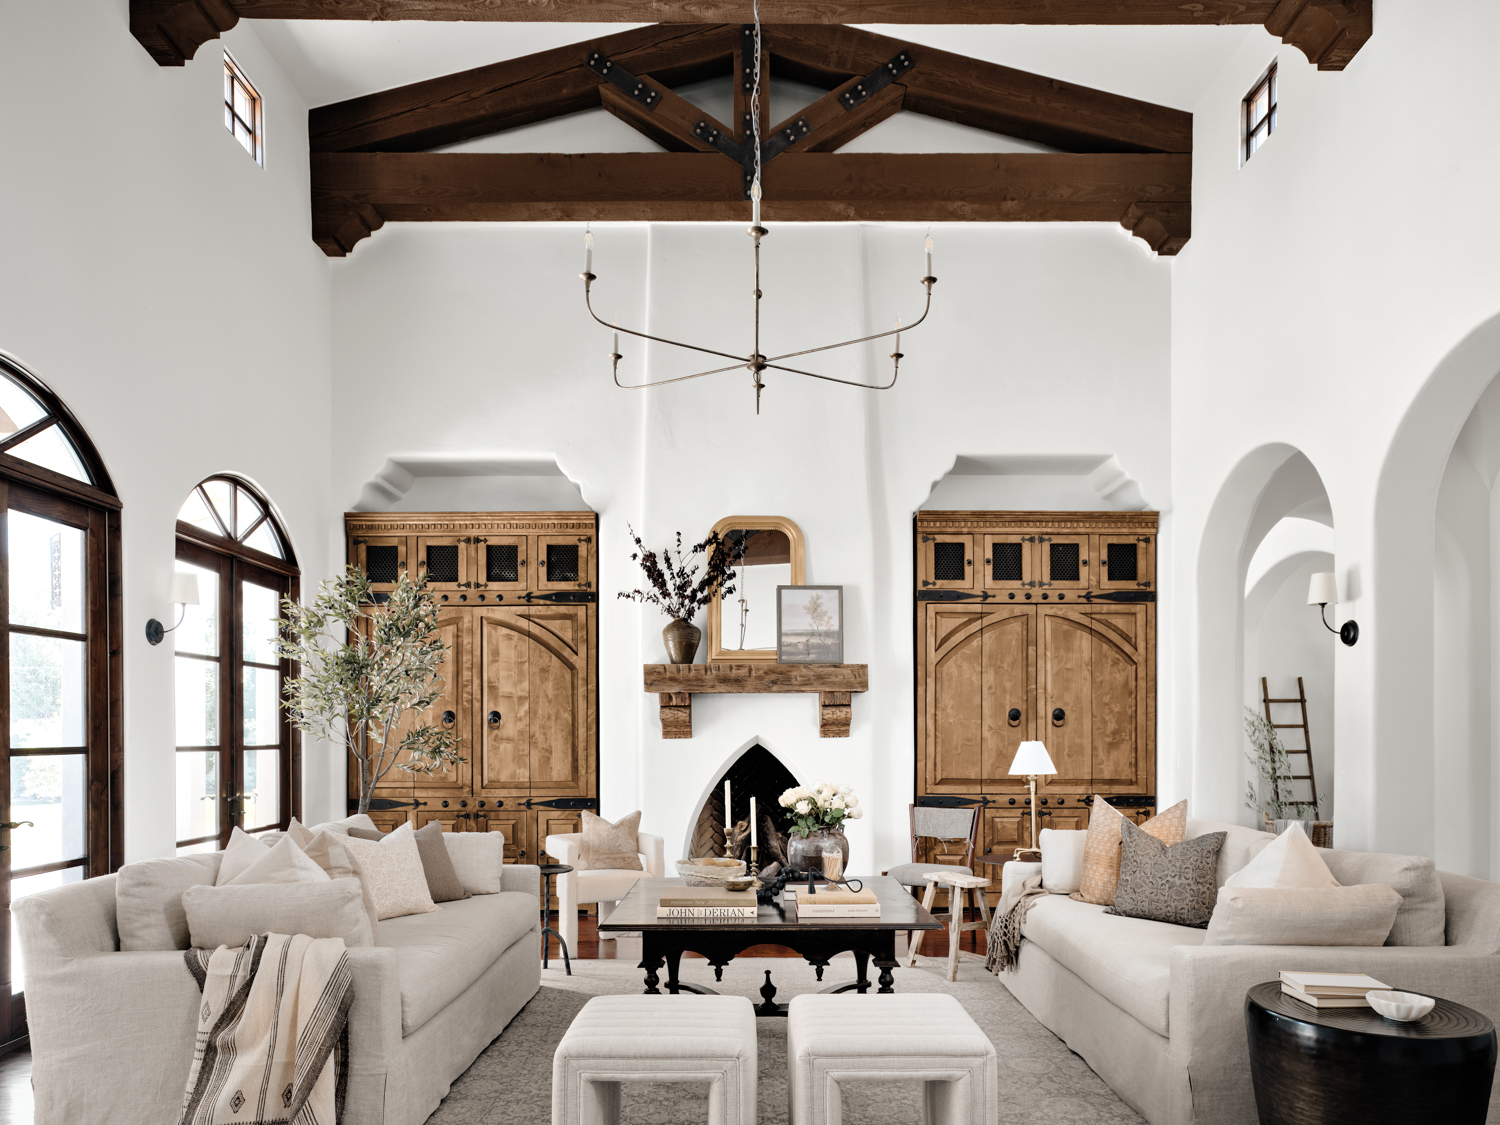 This Spanish Colonial-Style Home In Arizona Gets A Bright New Look